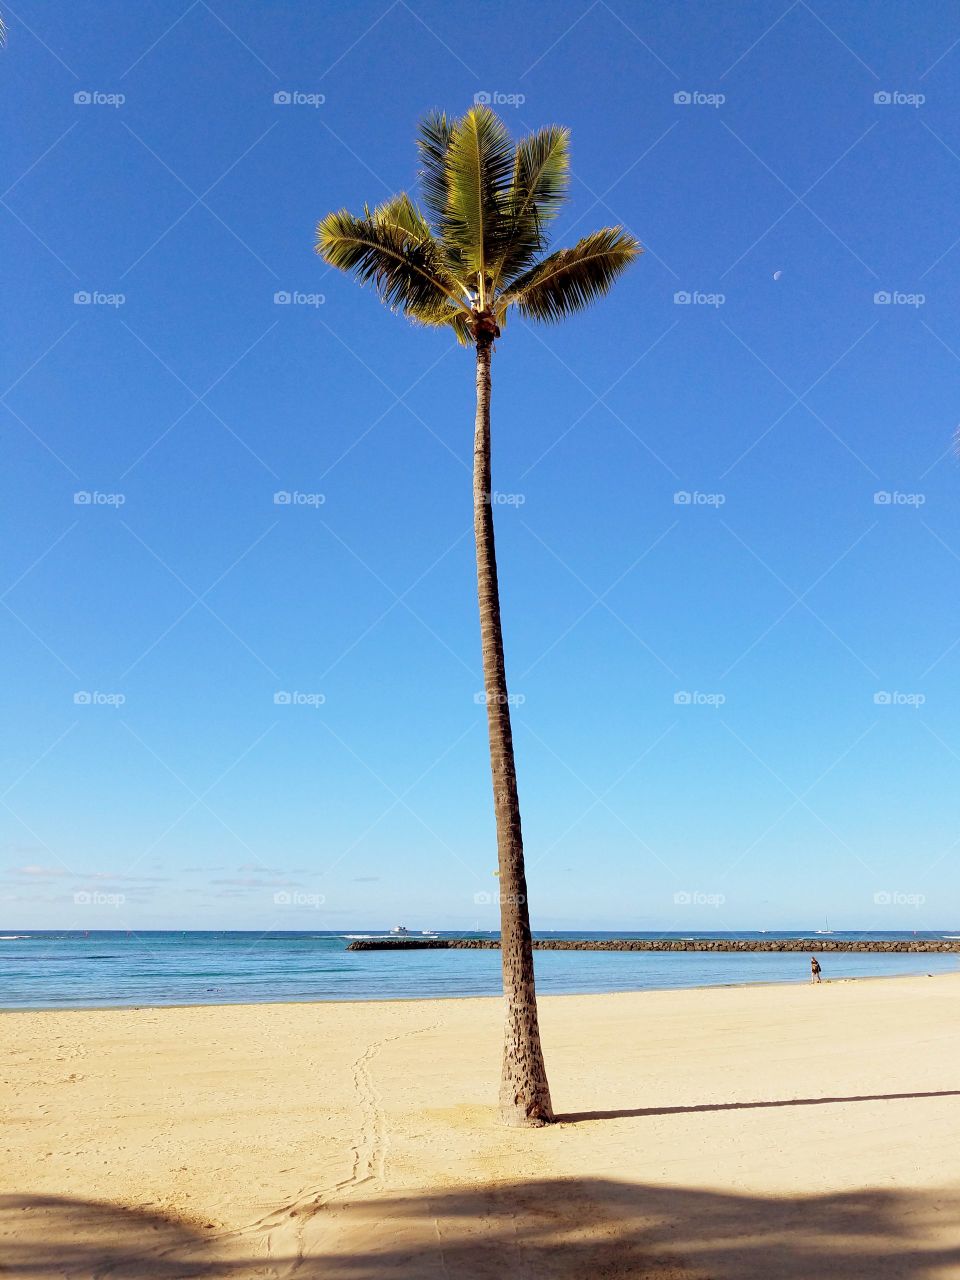 View of palm tree on beach